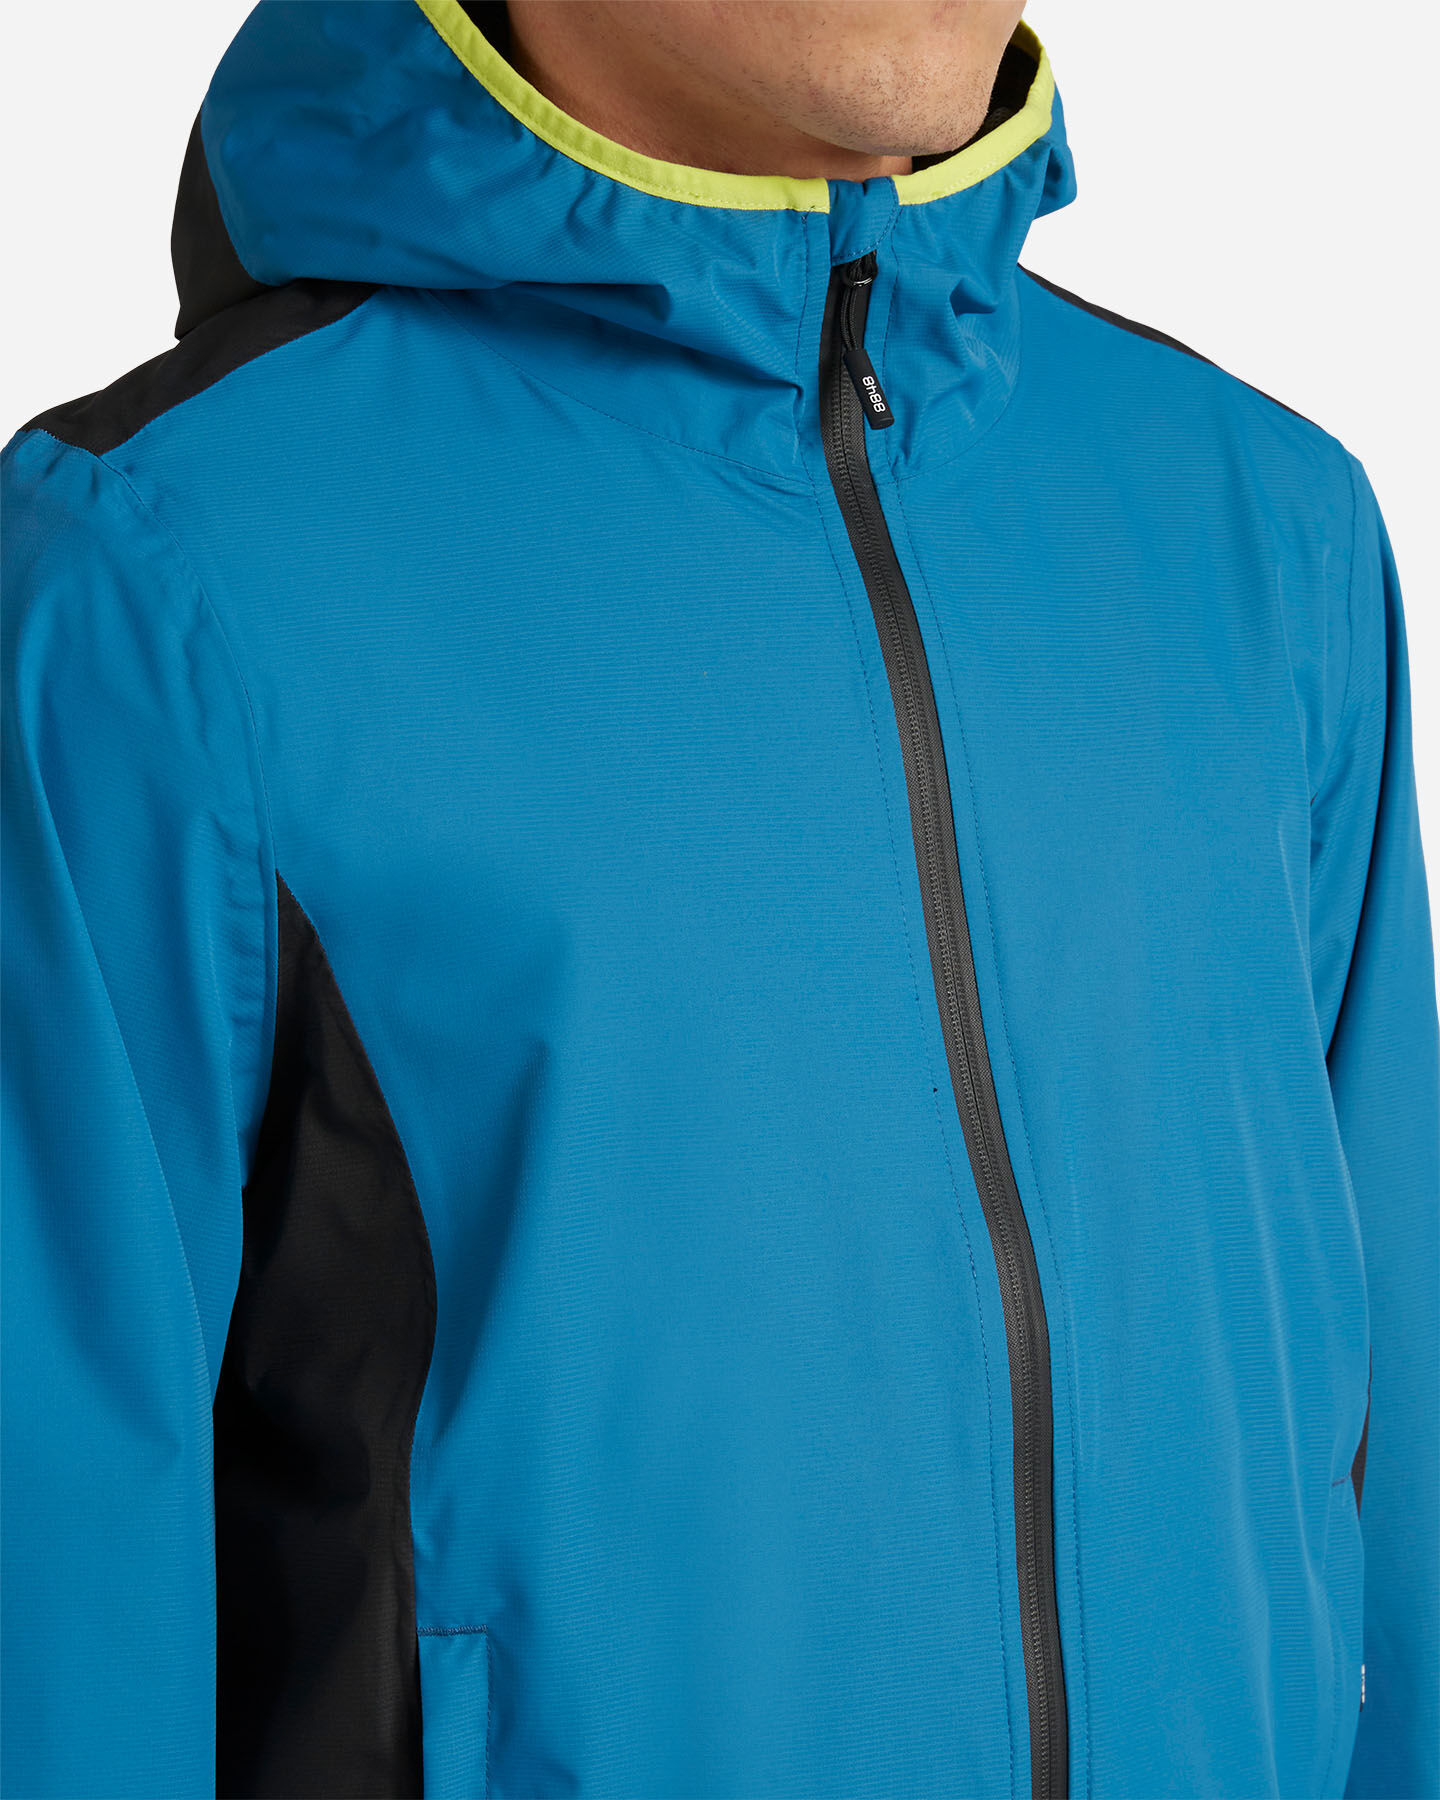  Giacca outdoor 8848 MOUNTAIN HIKE M S4120744|555/050|M scatto 4